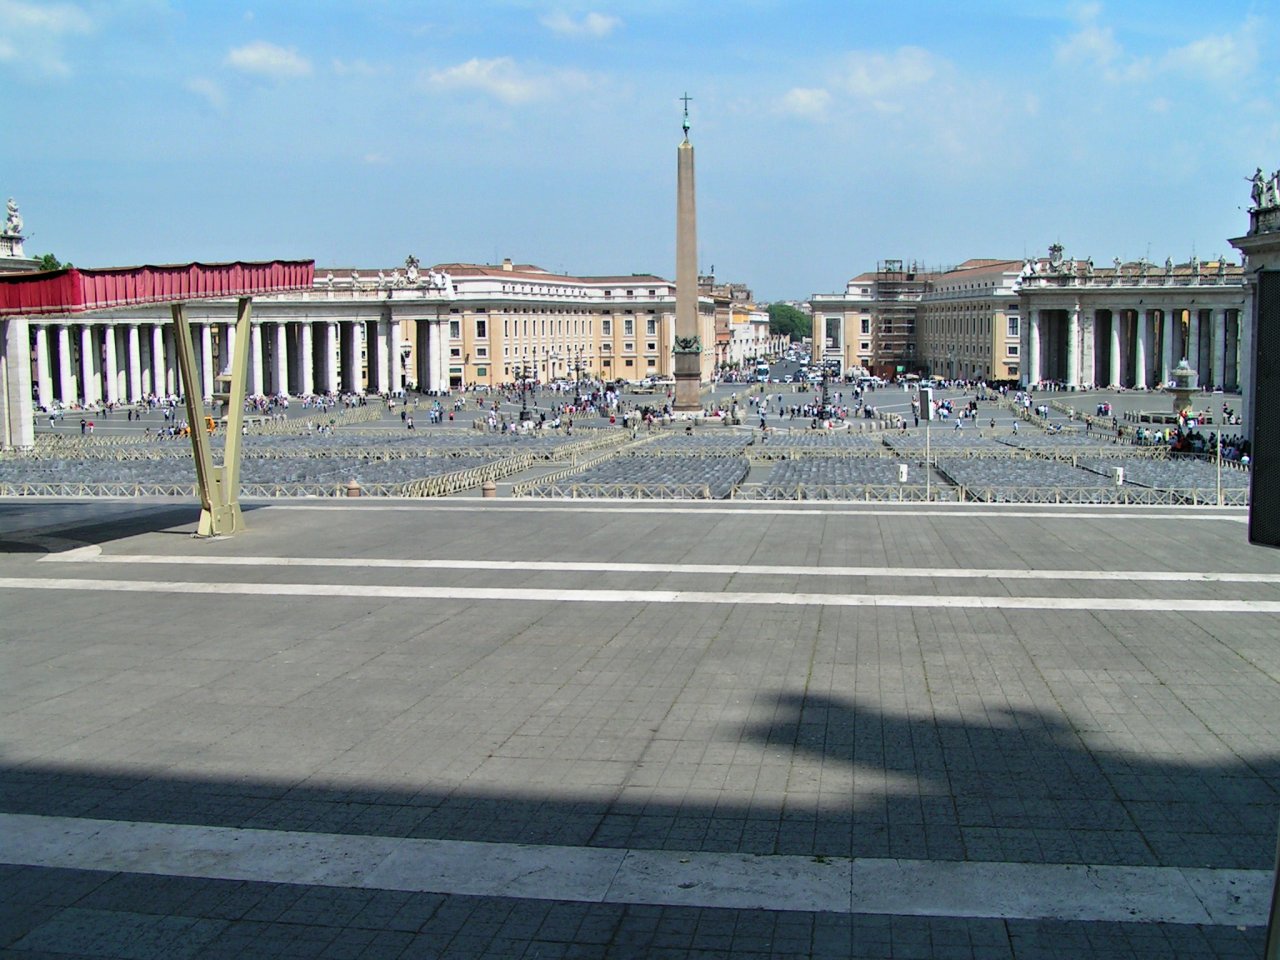 St. Peter’s Square, Rome Attractions, Best Places to visit in Rome